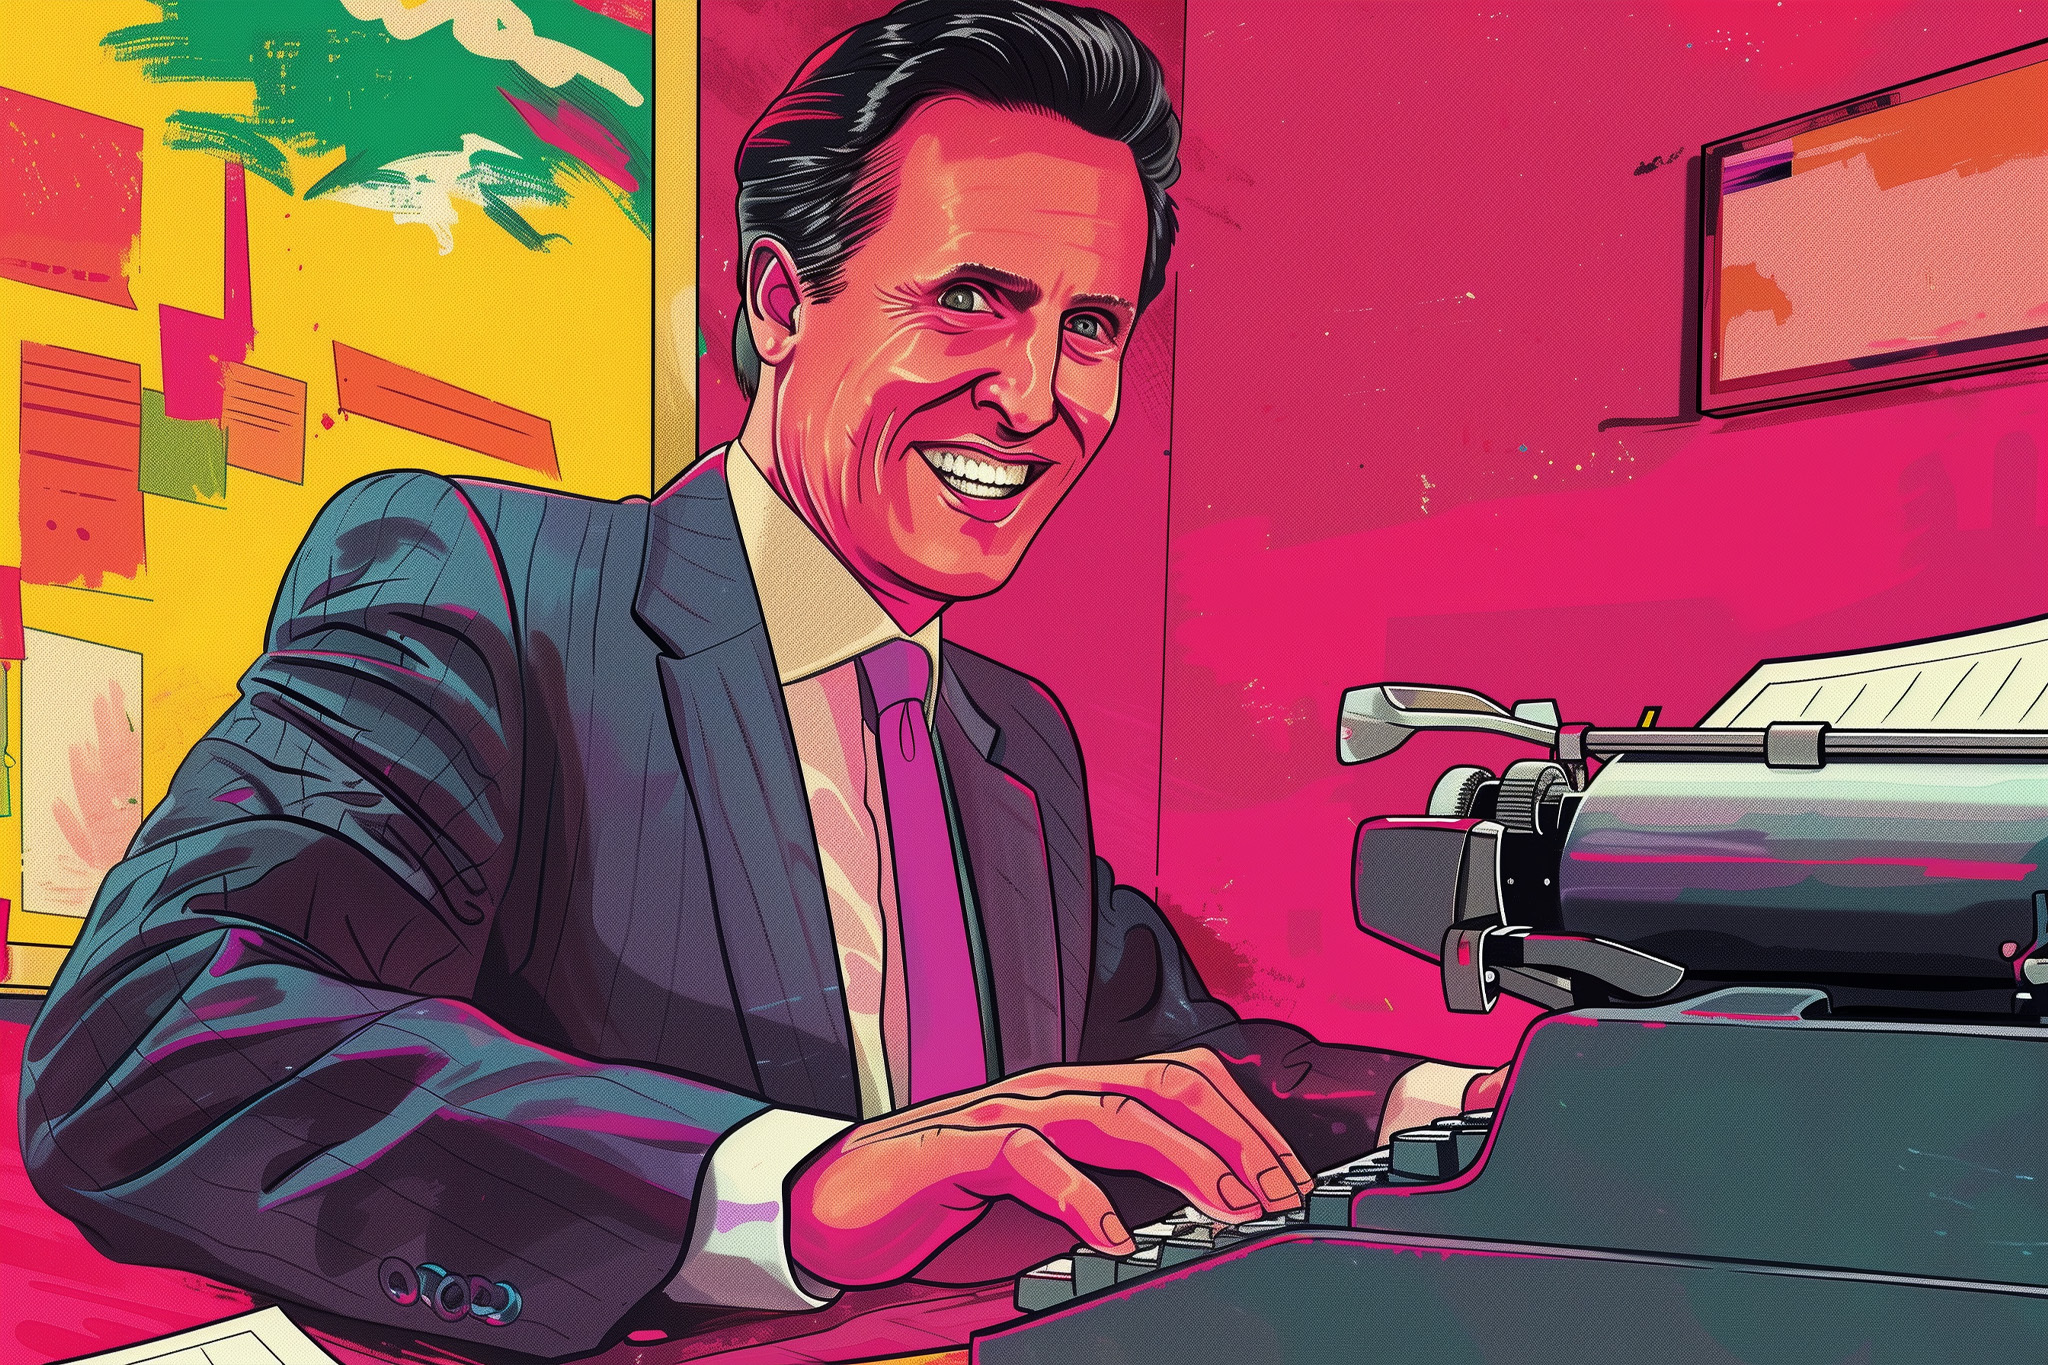 An illustration shows a smiling man in a suit at a desk with a typewriter, set against a vivid pink and yellow background.